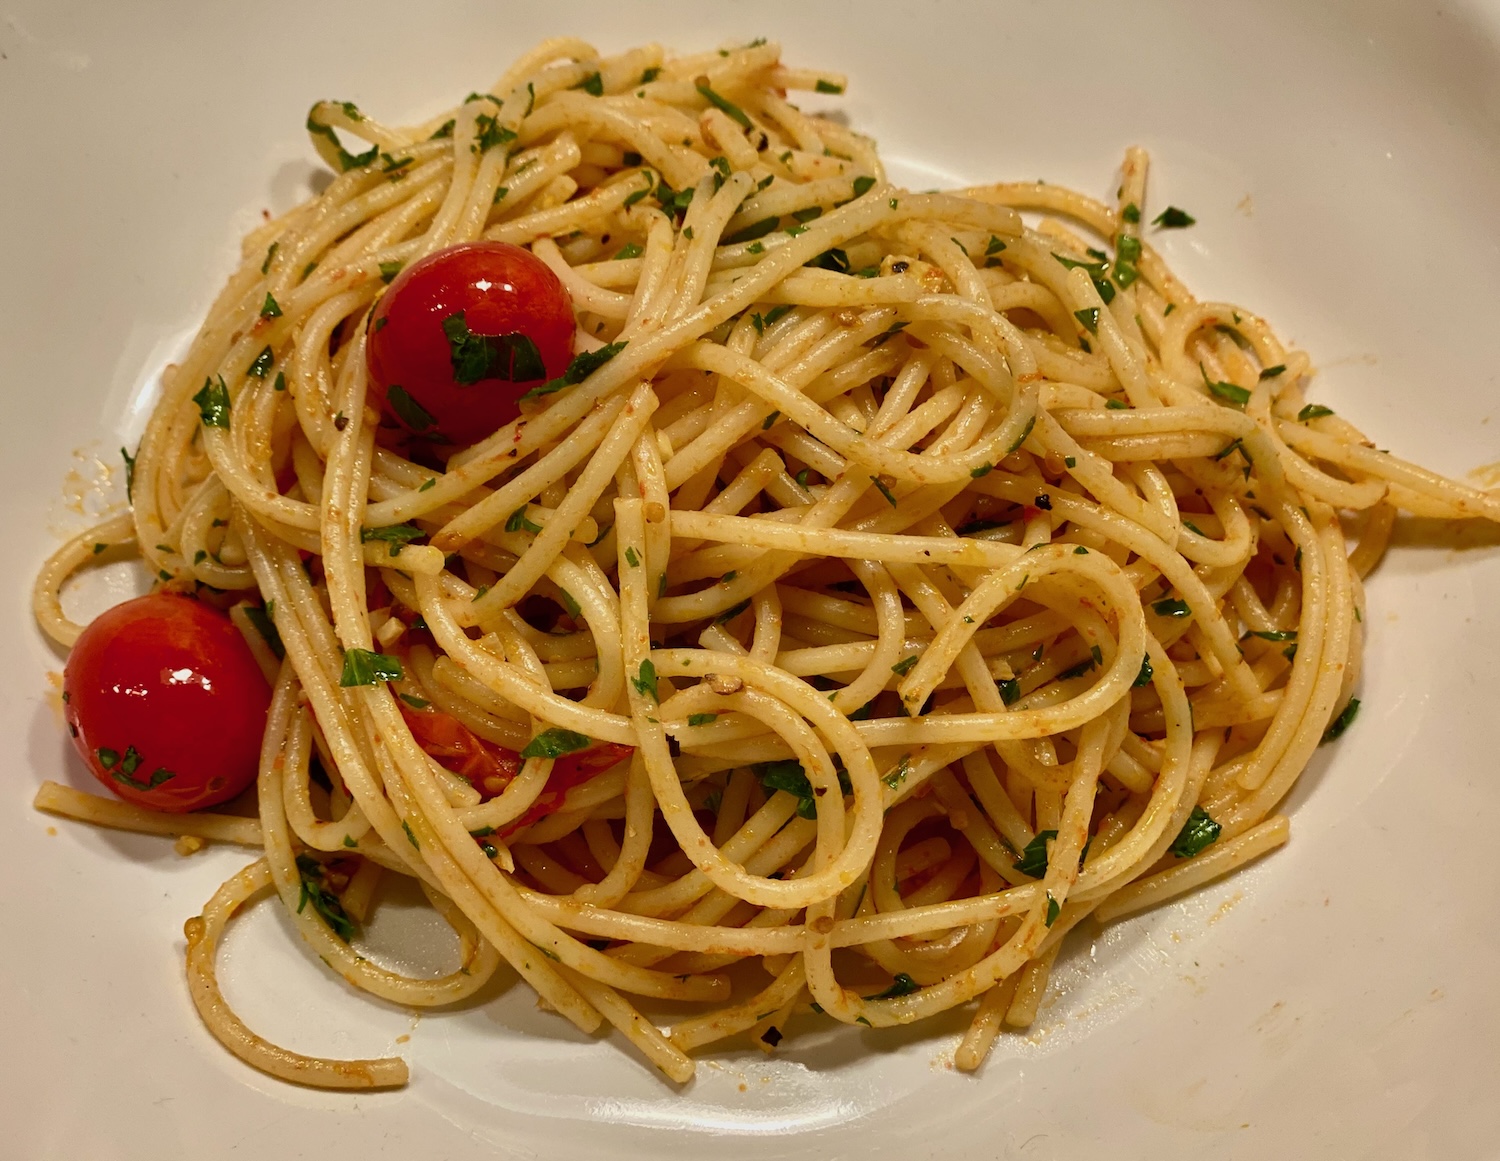 Spaghetti with Tomatoes, Parsley, and Lemon